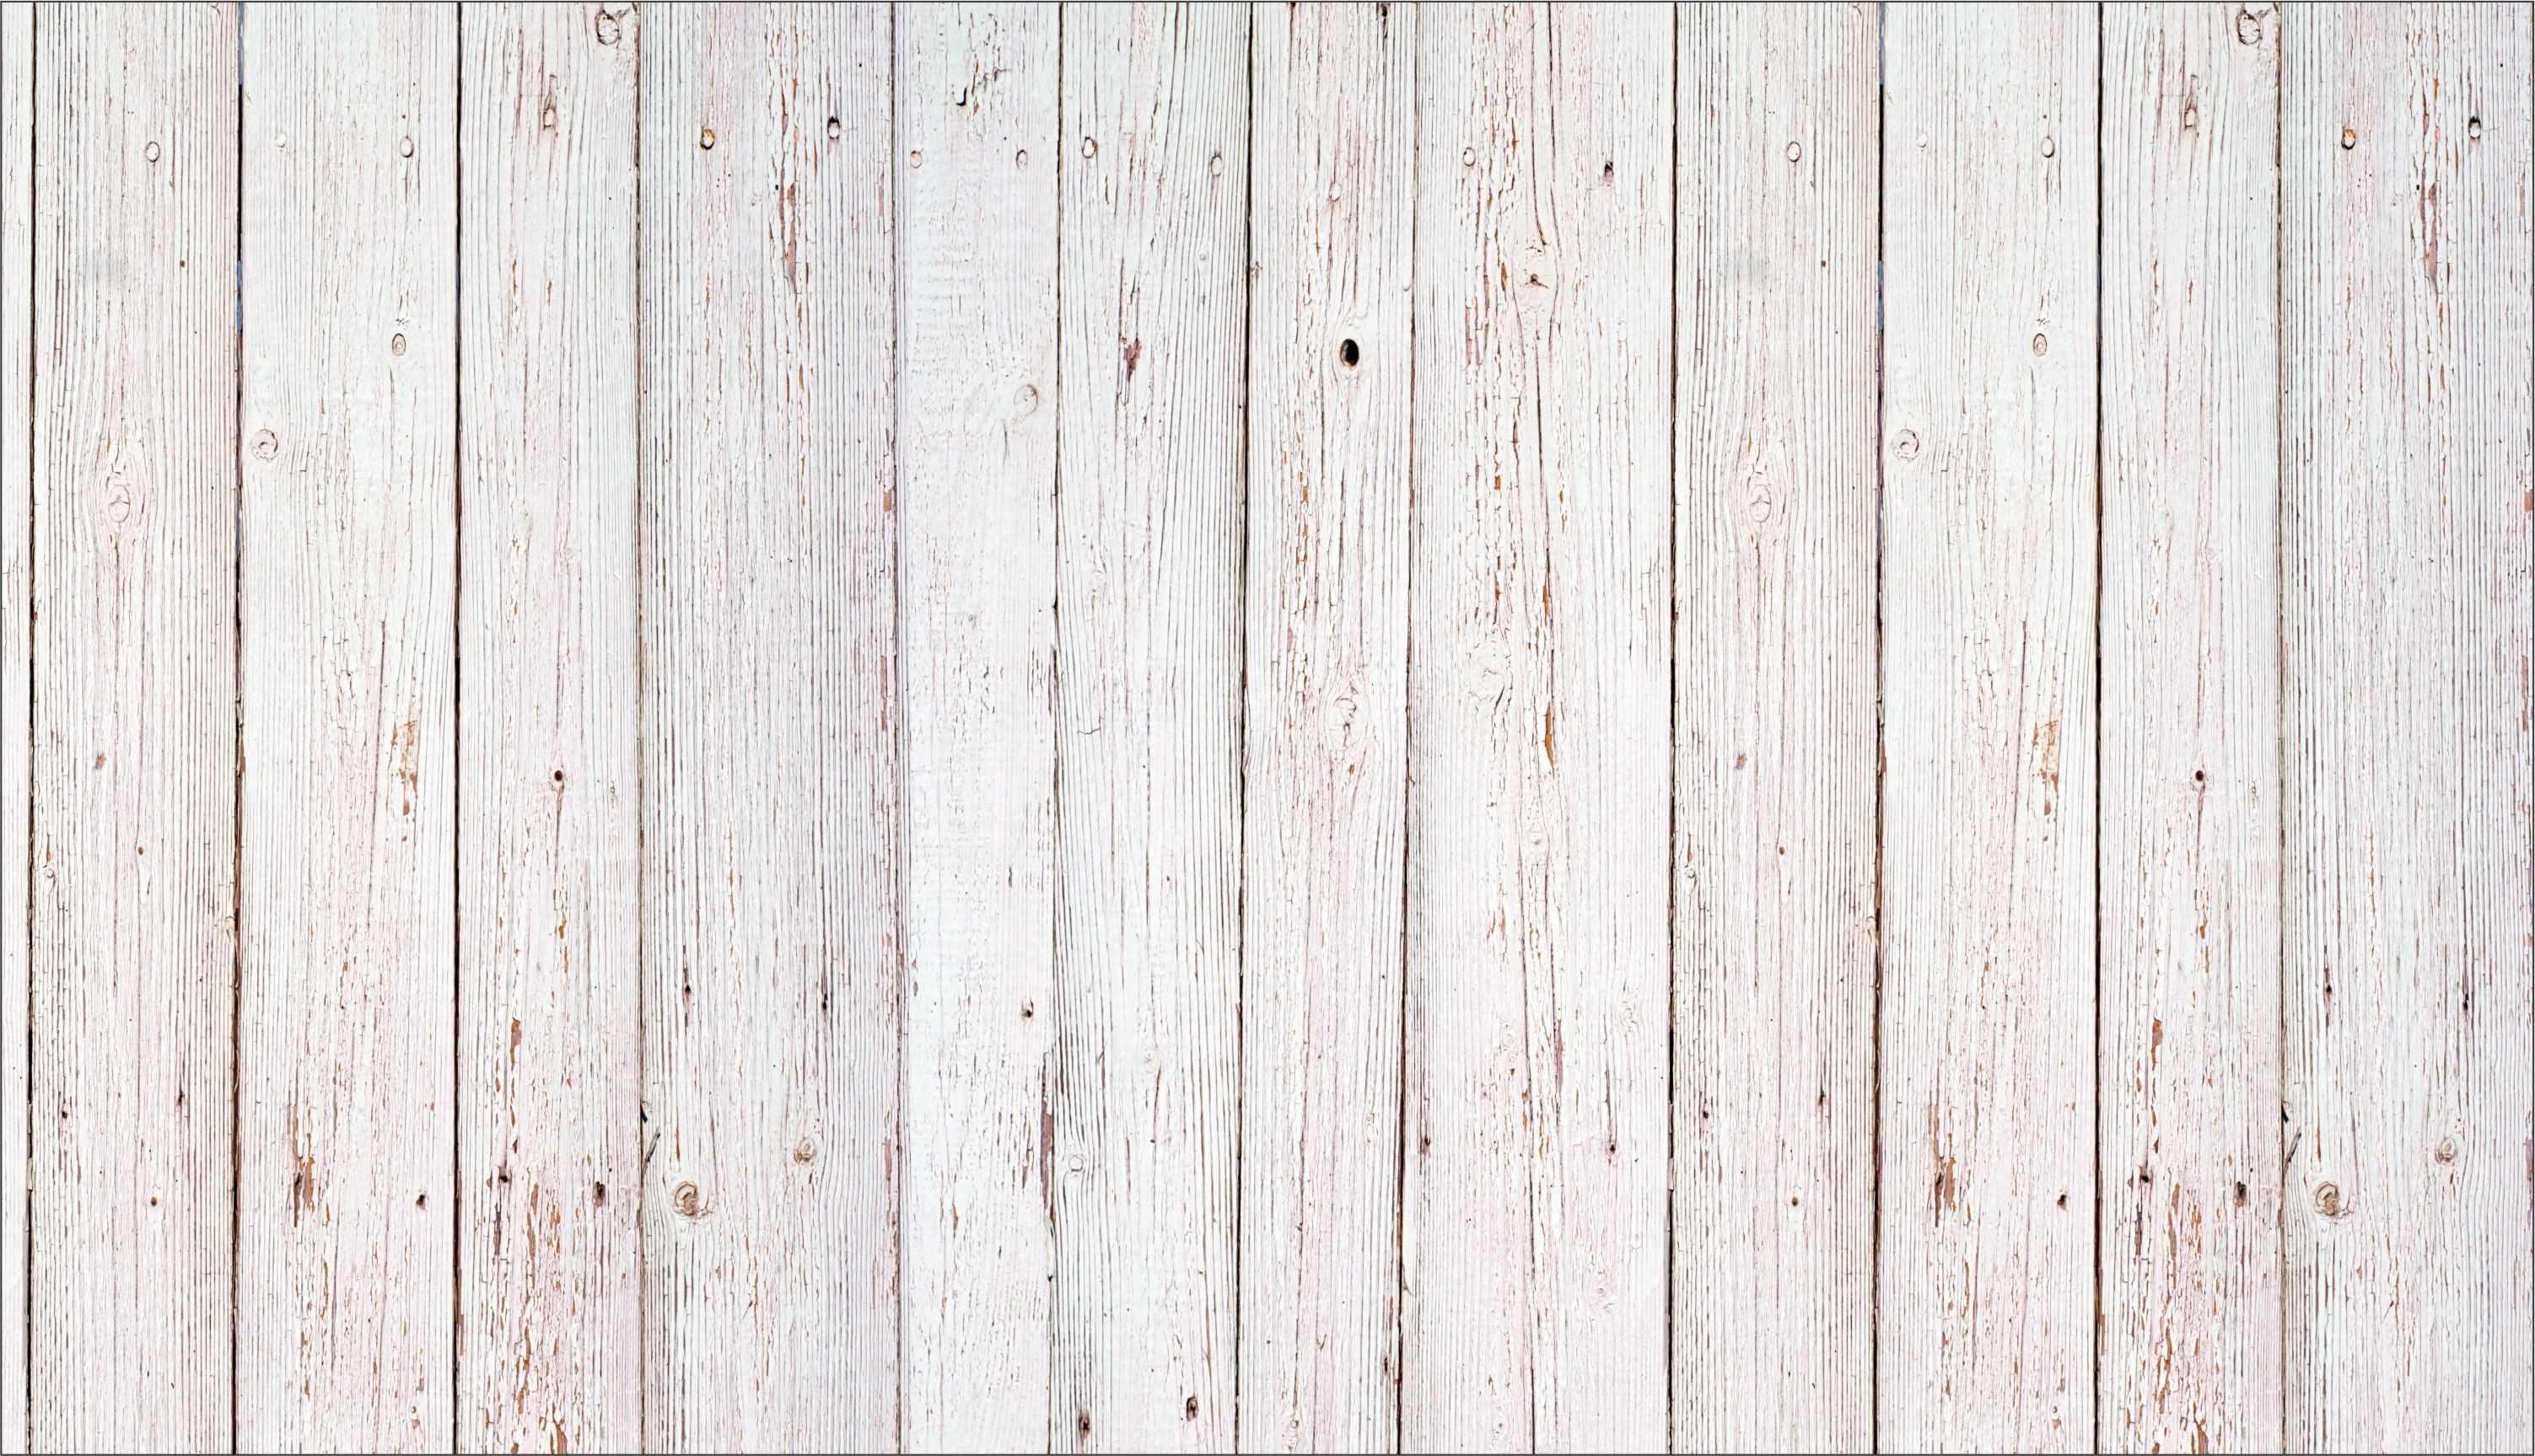 3006x1727 White Wood HD Wallpaper Desktop Background #rpt  px 1.07 MB  AbstractRustic Wood. Repeatable Background. Iphone.